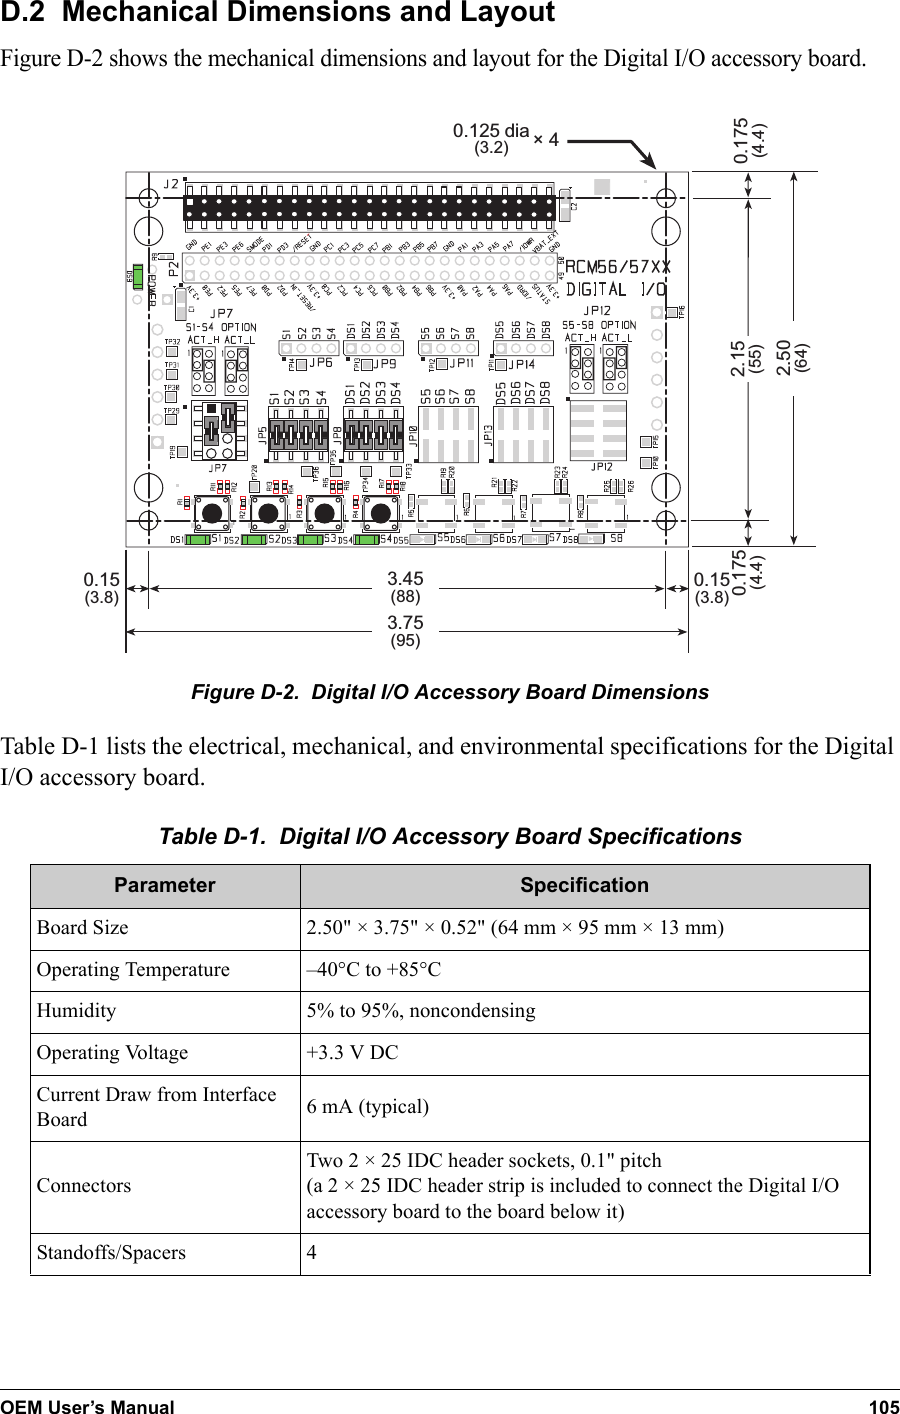 OEM User’s Manual 105D.2  Mechanical Dimensions and LayoutFigure D-2 shows the mechanical dimensions and layout for the Digital I/O accessory board.0.15(3.8)0.15(3.8)0.175(4.4)3.45(88)3.75(95)2.50(64)0.175(4.4)× 40.125 dia(3.2)2.15(55)Figure D-2.  Digital I/O Accessory Board DimensionsTable D-1 lists the electrical, mechanical, and environmental specifications for the Digital I/O accessory board.Table D-1.  Digital I/O Accessory Board SpecificationsParameter SpecificationBoard Size 2.50&quot; × 3.75&quot; × 0.52&quot; (64 mm × 95 mm × 13 mm)Operating Temperature –40°C to +85°CHumidity 5% to 95%, noncondensingOperating Voltage +3.3 V DCCurrent Draw from Interface Board 6 mA (typical)ConnectorsTwo 2 × 25 IDC header sockets, 0.1&quot; pitch(a 2 × 25 IDC header strip is included to connect the Digital I/O accessory board to the board below it)Standoffs/Spacers 4